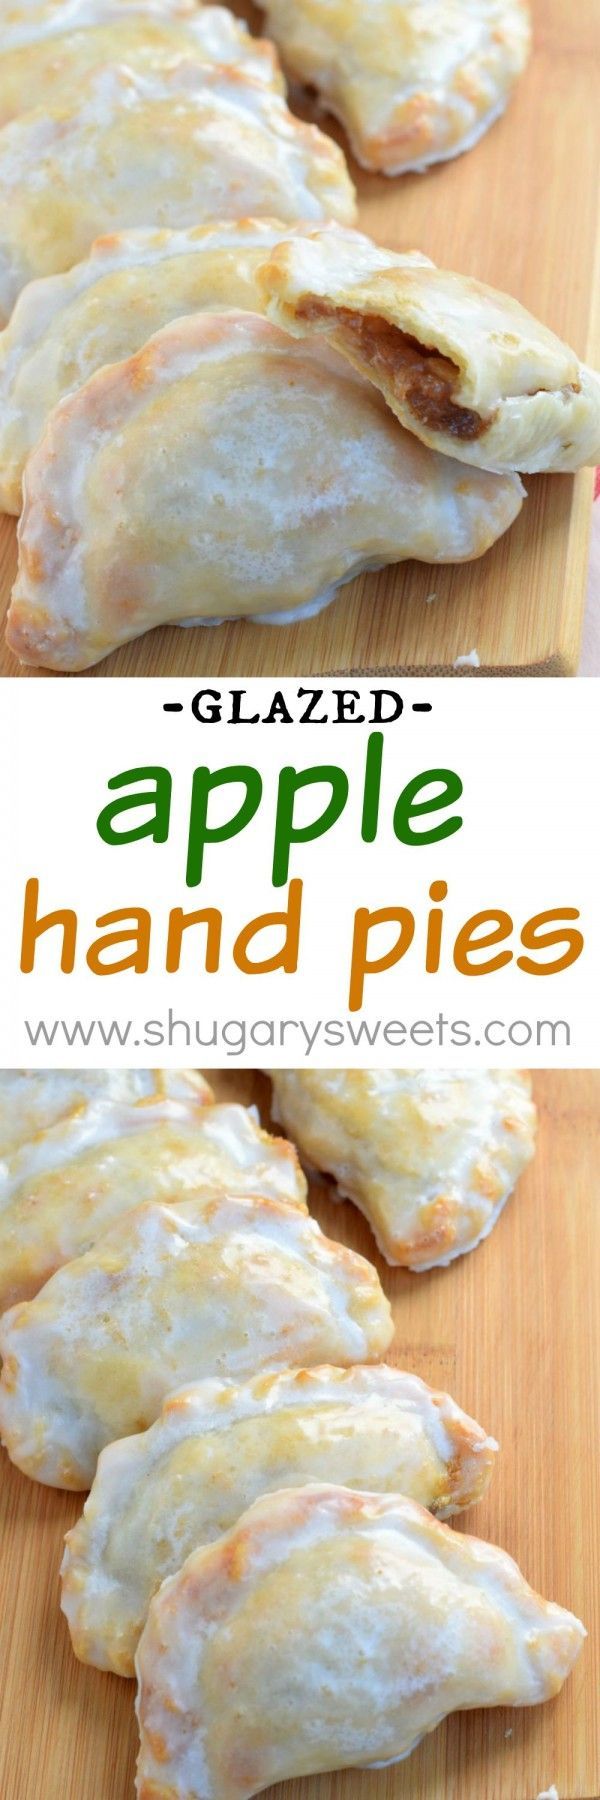 These Glazed Apple Hand Pies are the perfect fall treat. And in only 30 minutes, you’ll have one of these delicious baked treats